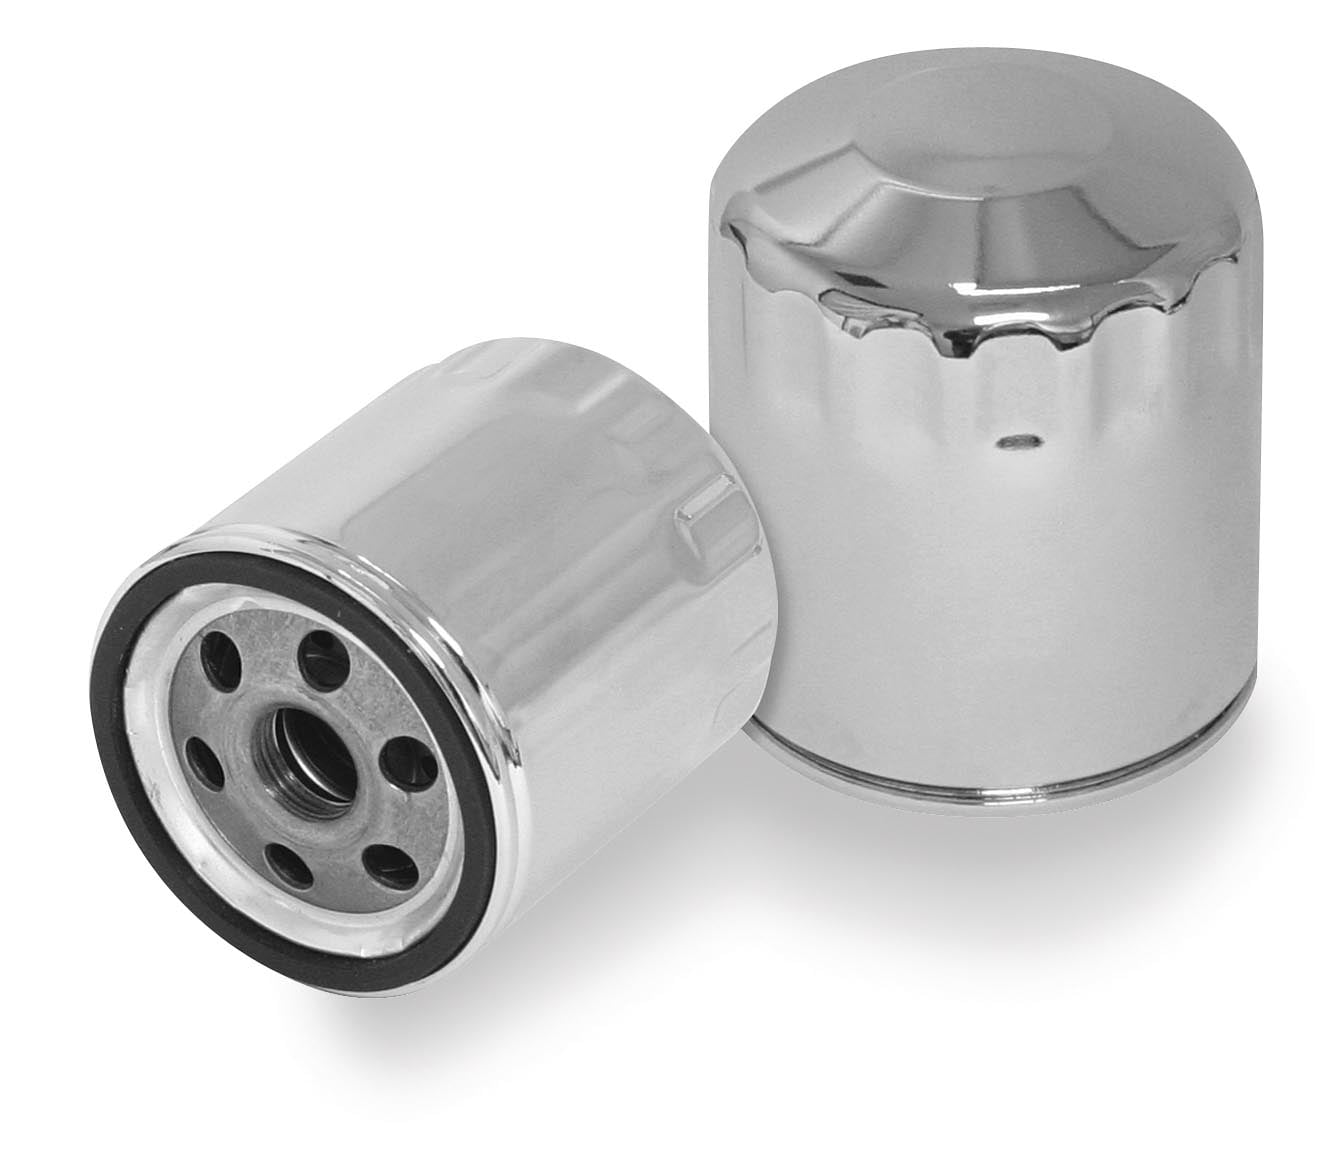 Sale alert! The AirHood's stainless steel oil filter is easily removea